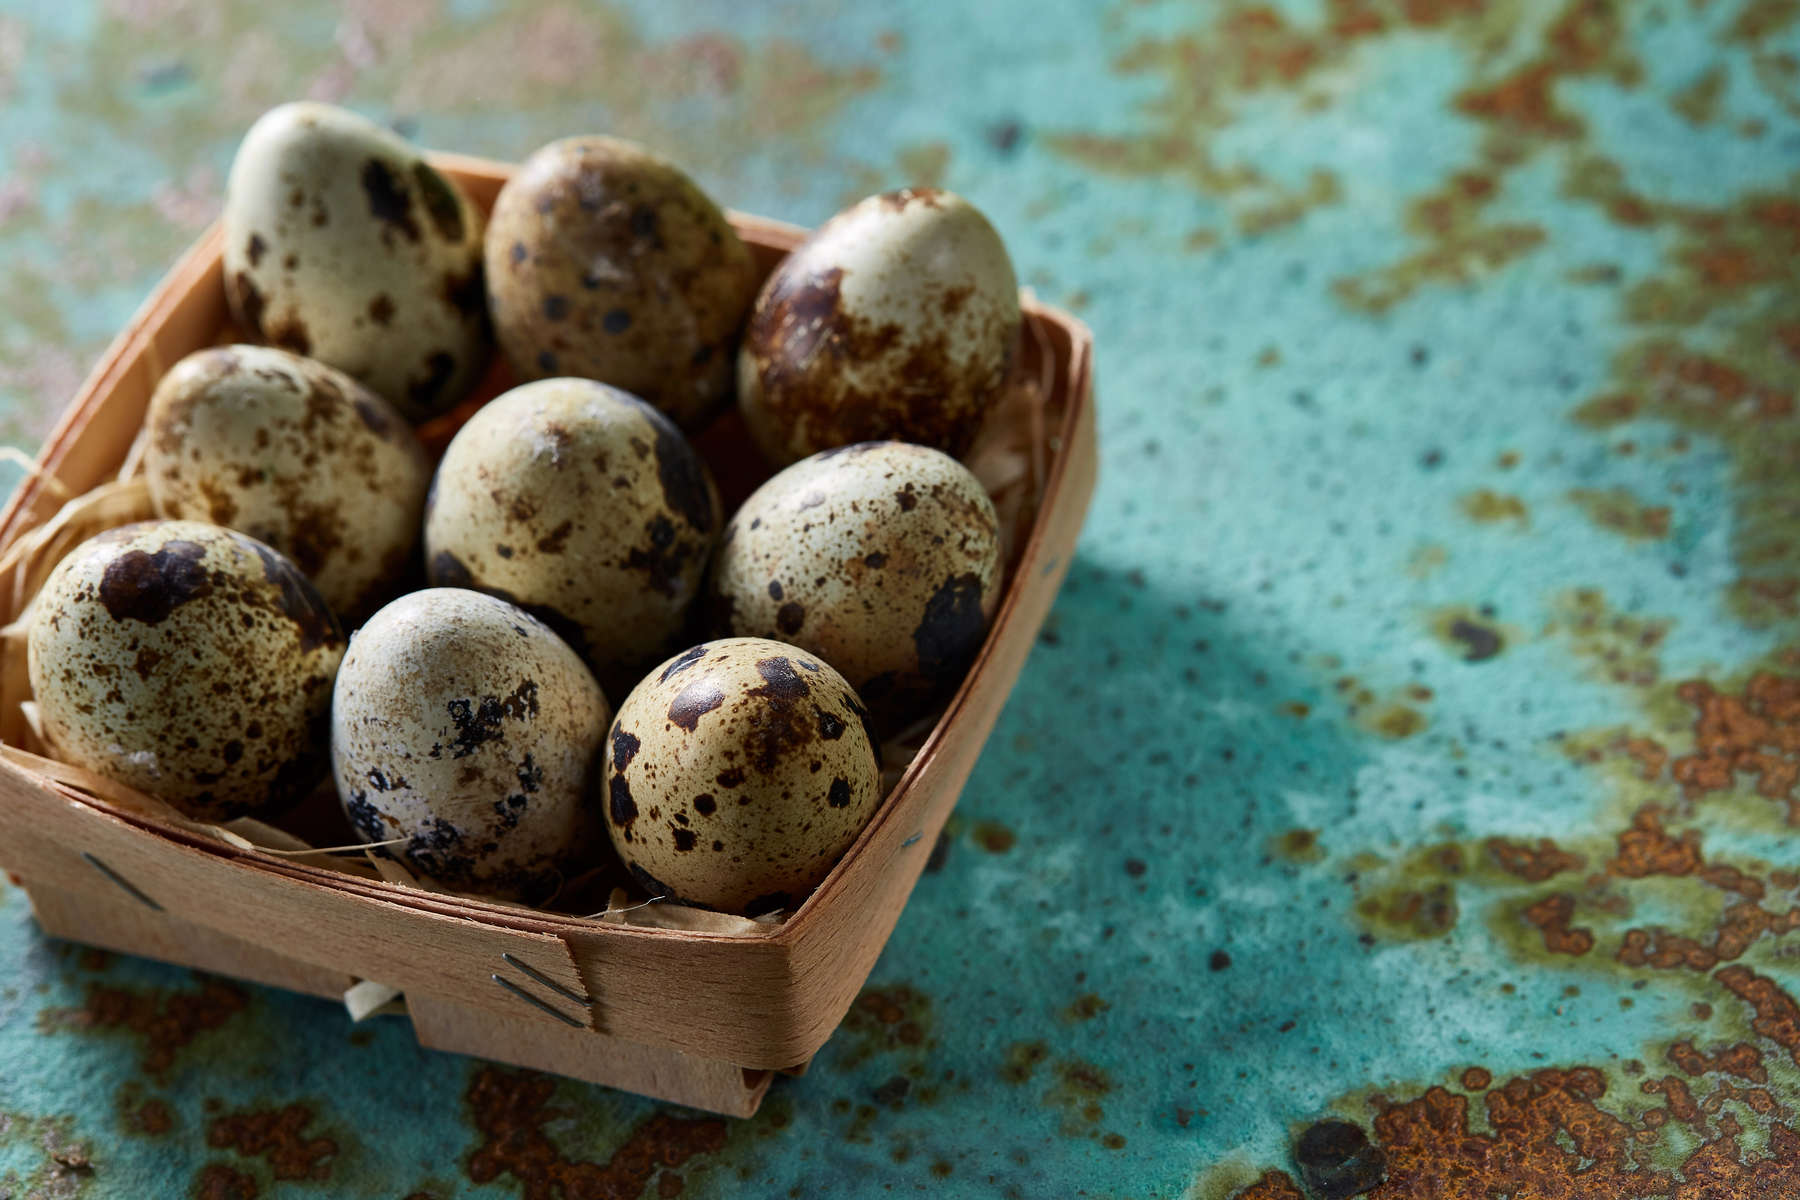 Quail eggs in a box on a blue textured background, top view, selective focus.